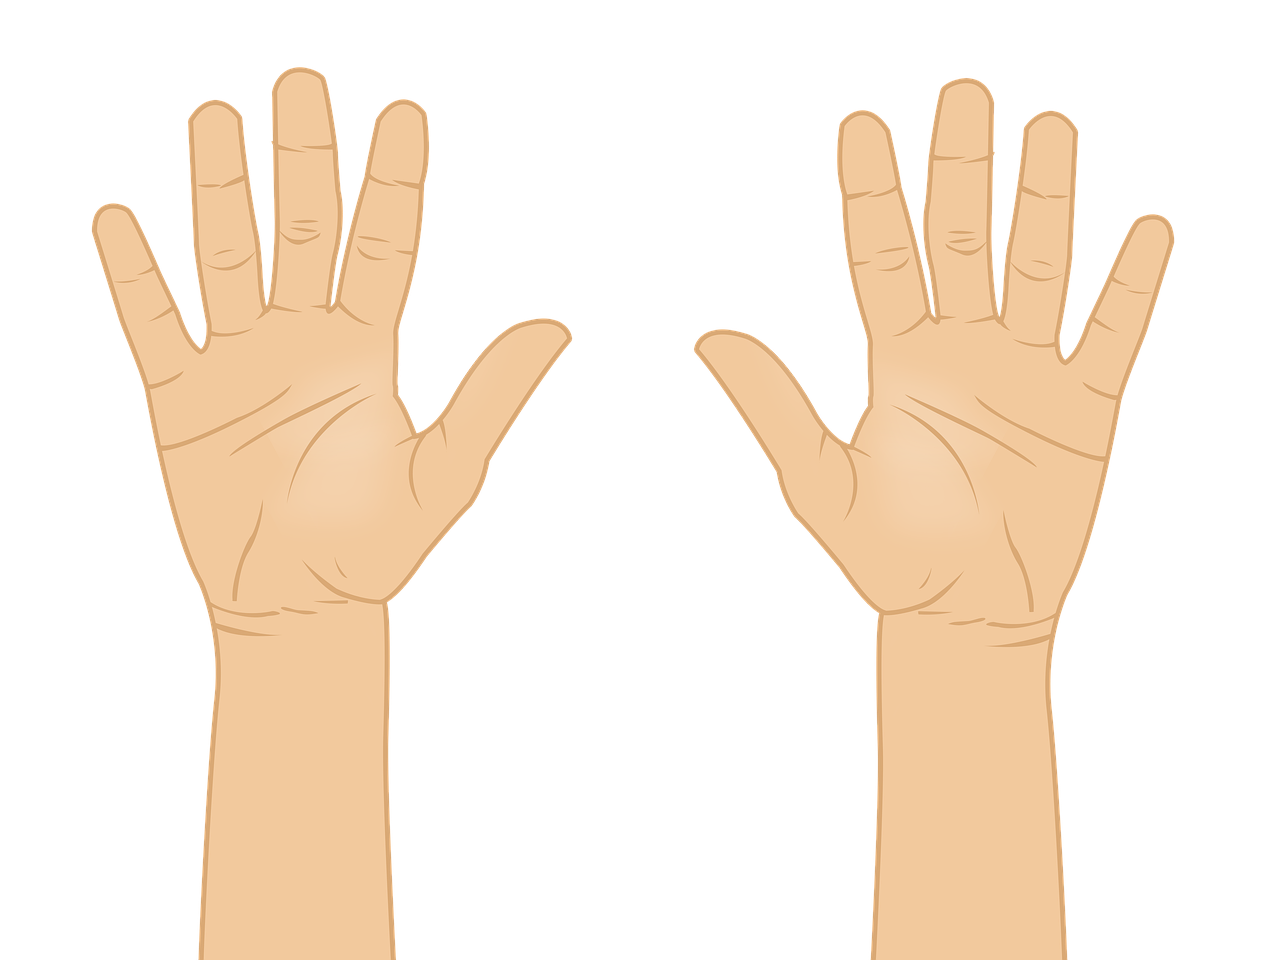 a pair of hands reaching up into the air, an illustration of, inspired by Oswaldo Guayasamín, hurufiyya, symmetrical face illustration, tiger paws as gloves, vectorized, stop frame animation